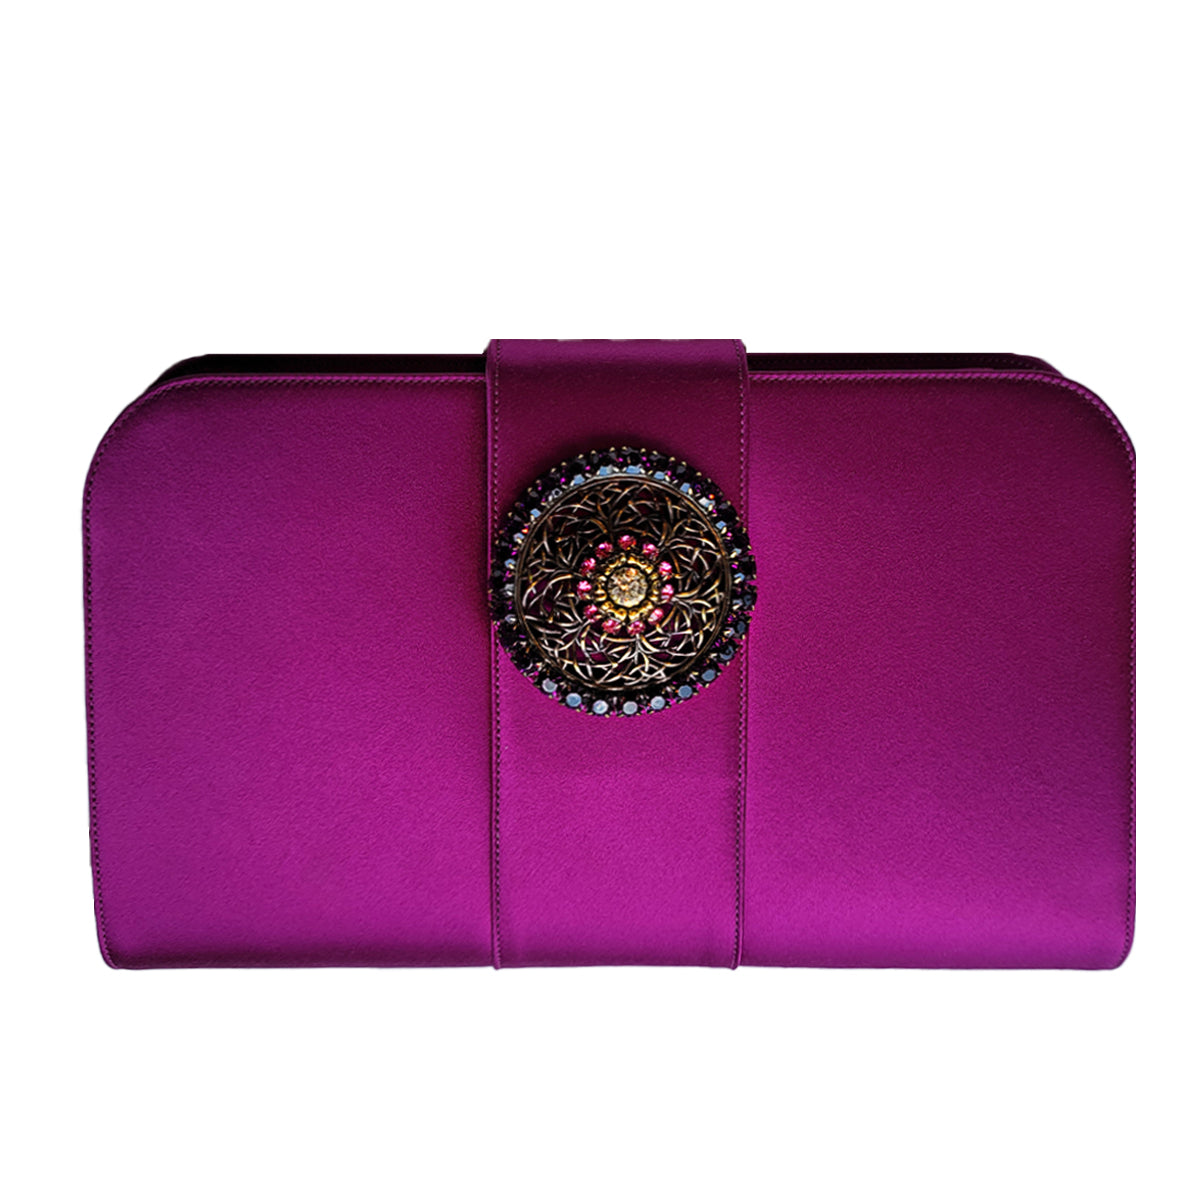 Bella Satin Clutch with Crystal in Orchidea